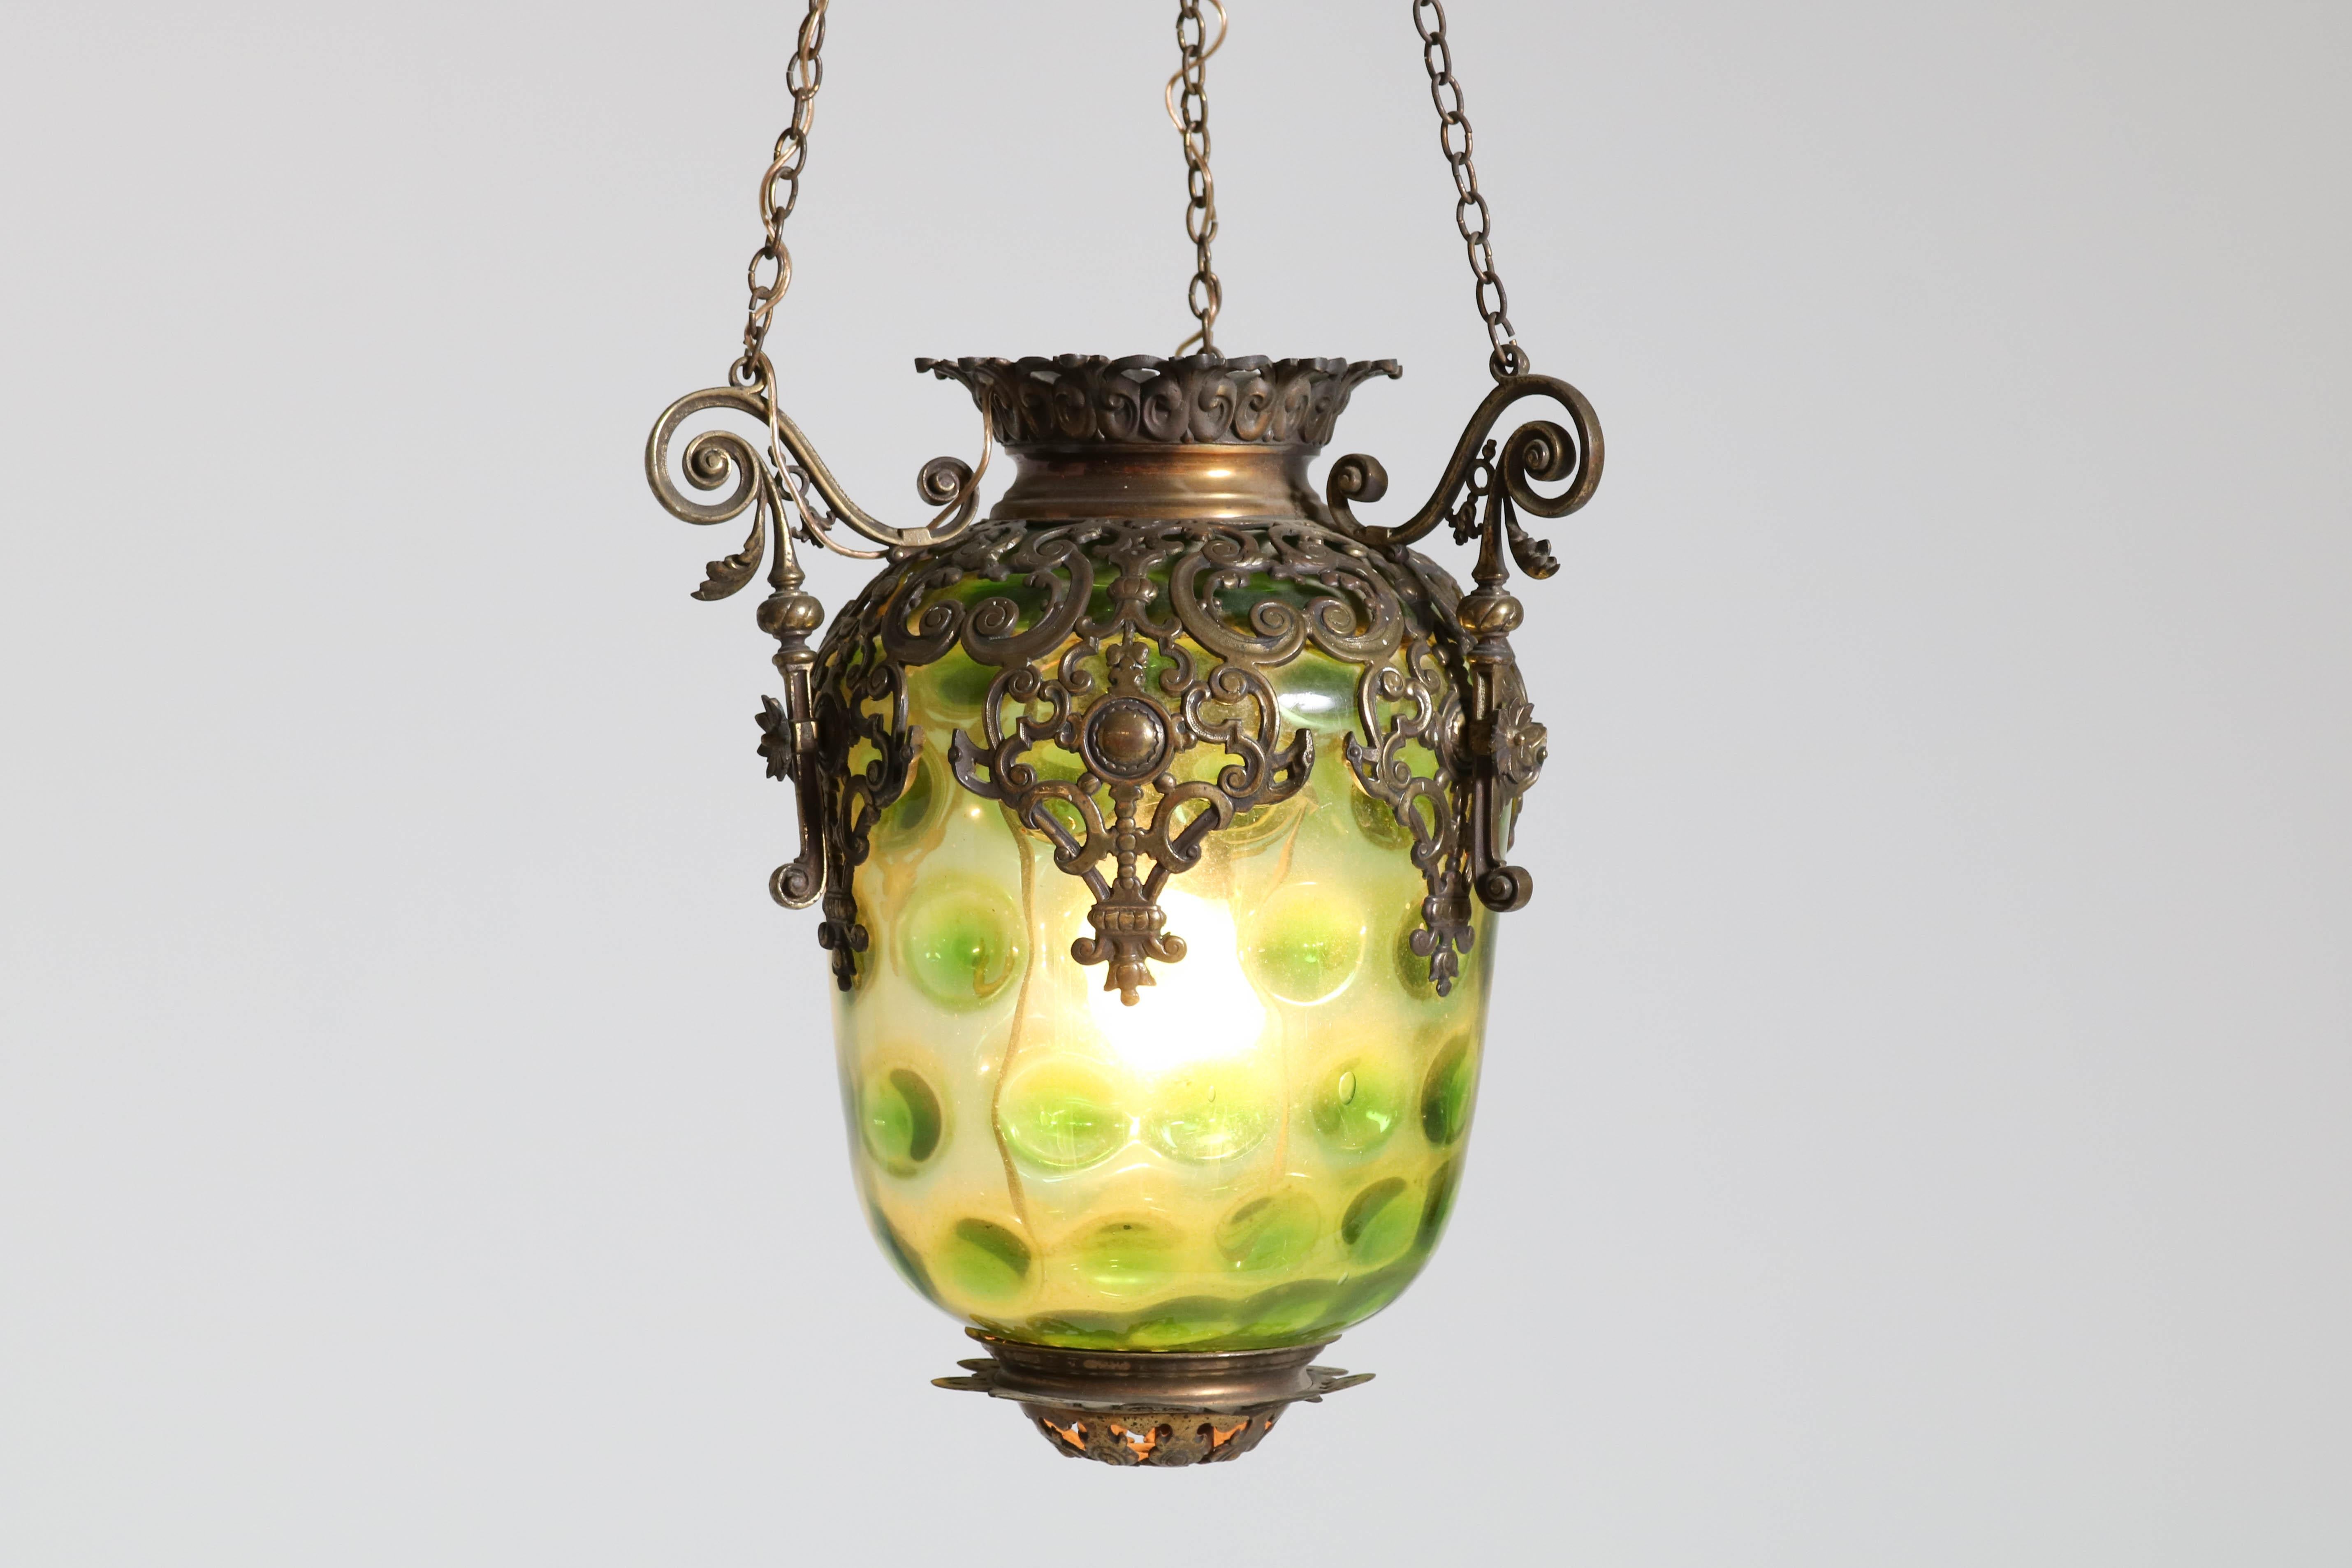 Belle Époque Antique French Brass Hall Lantern with Original Green Glass Shade, 1900s